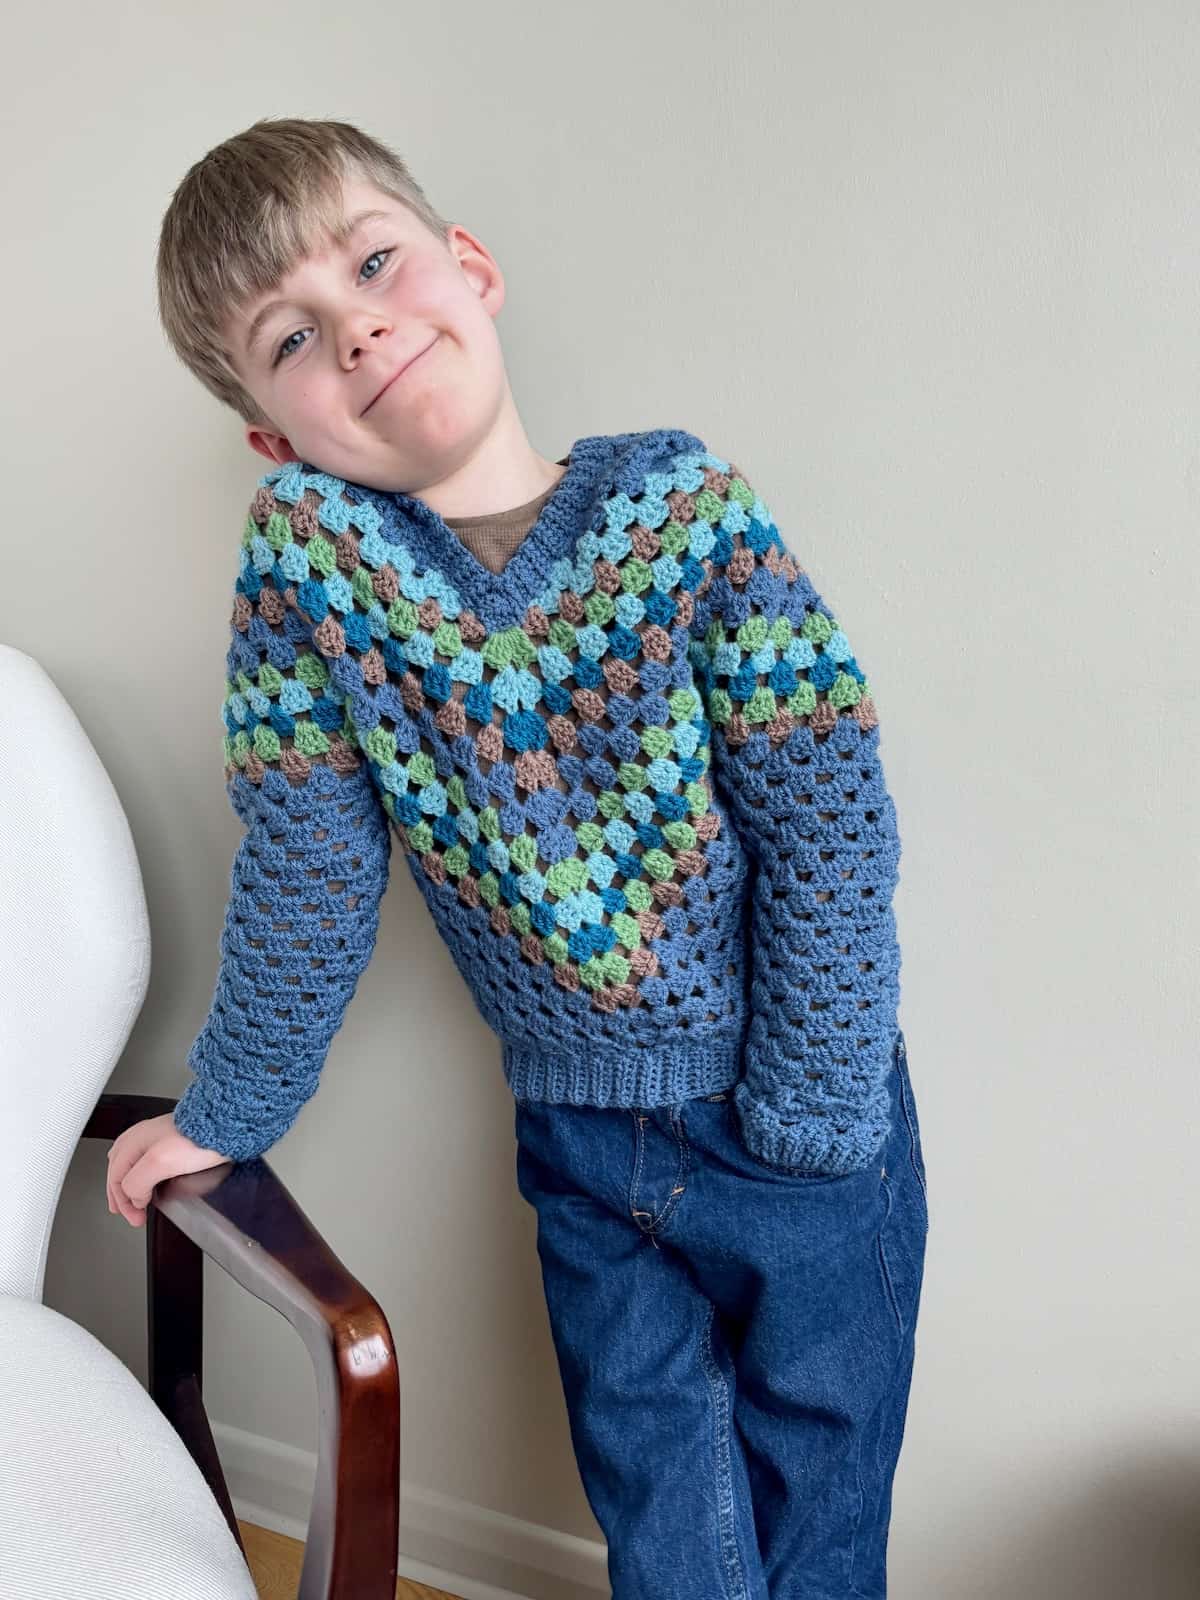 A young boy wearing a crocheted sweater leaning against a chair.